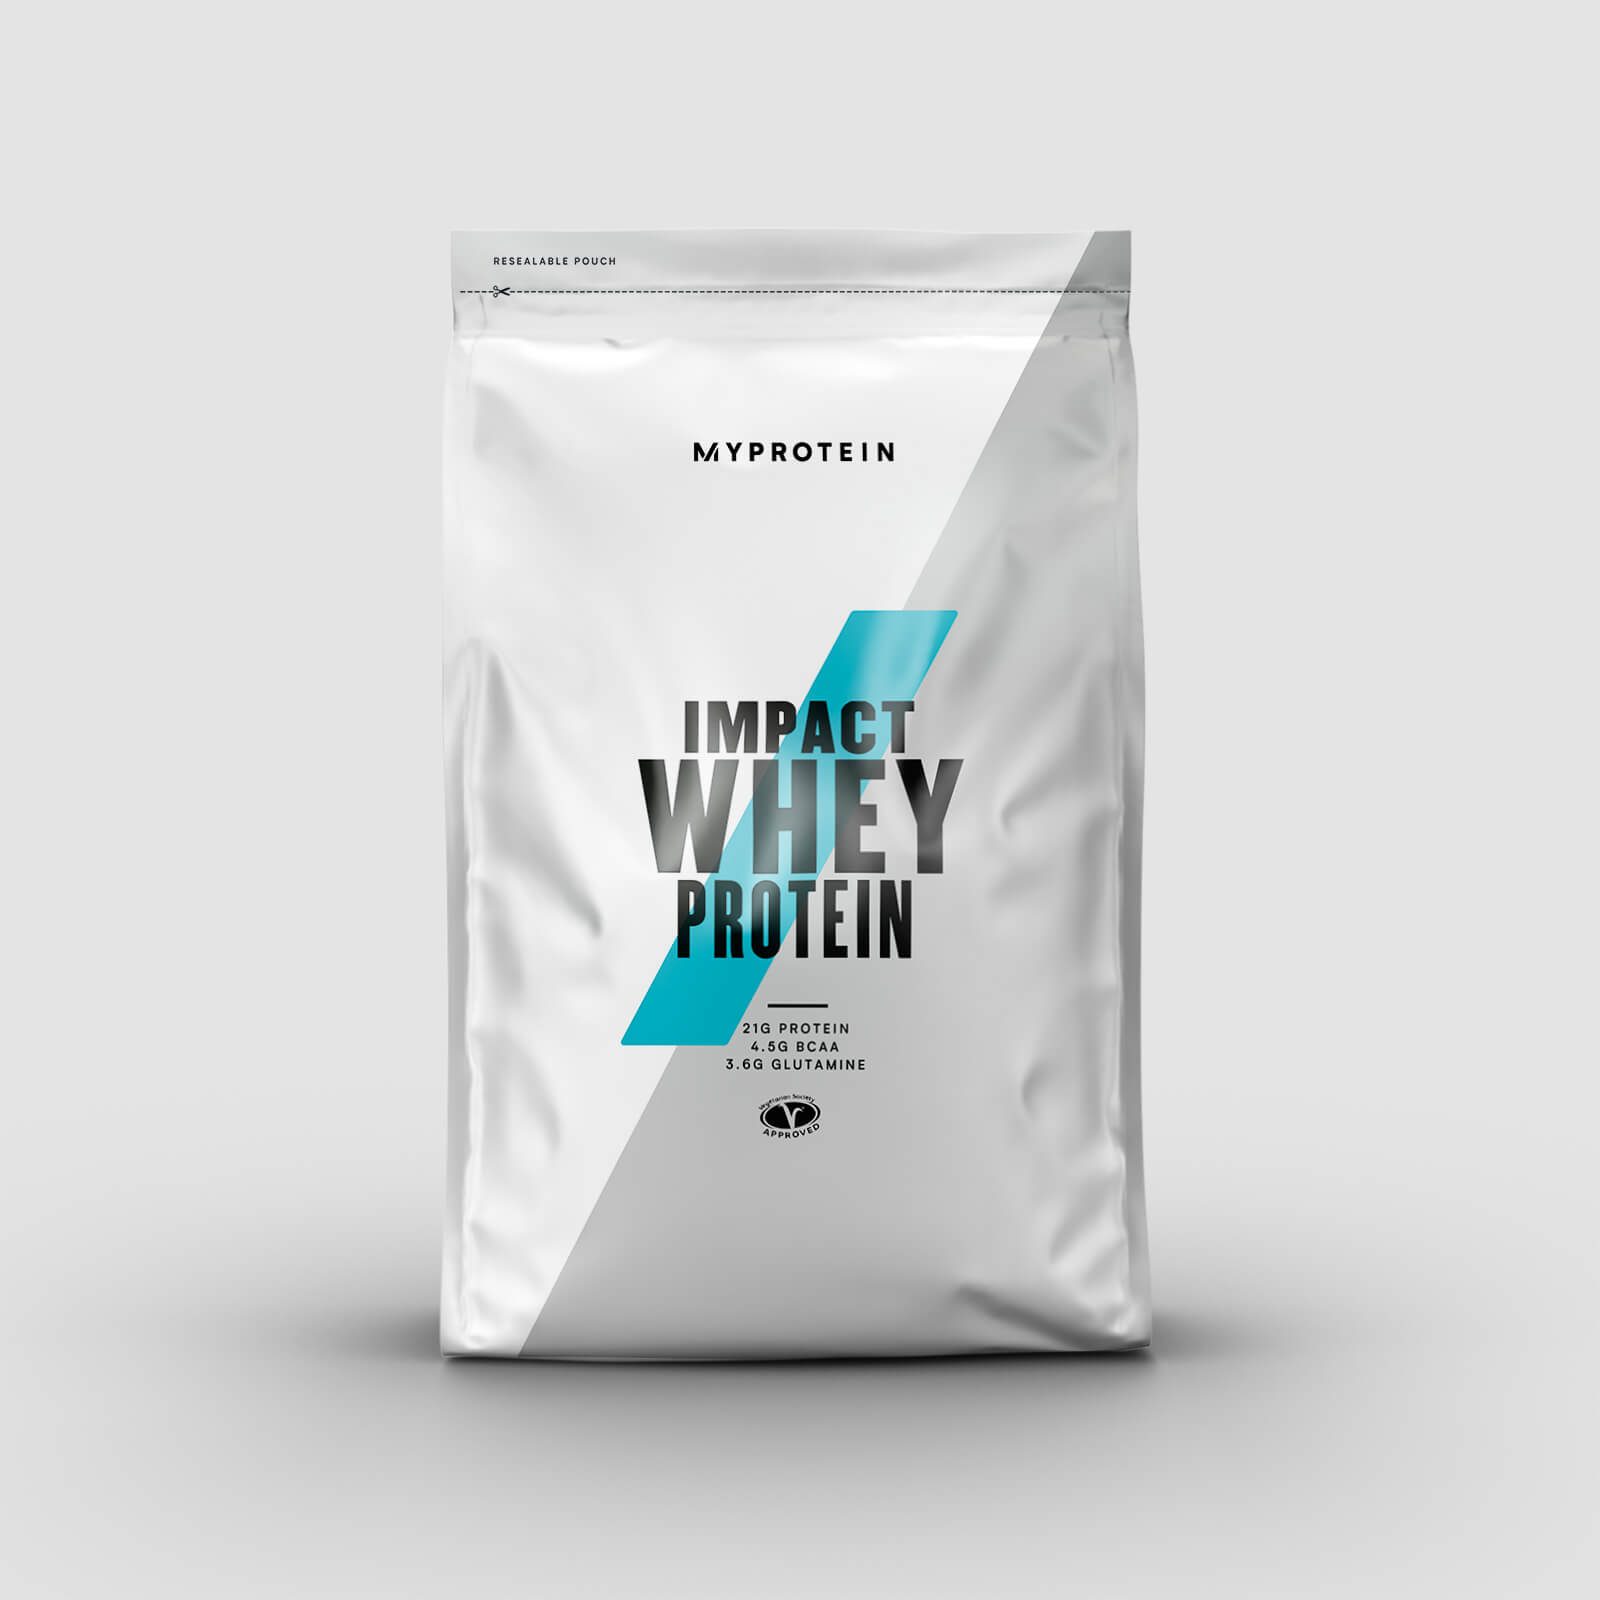 Image Of Myprotein Impact Whey Protein Beast Nutrition